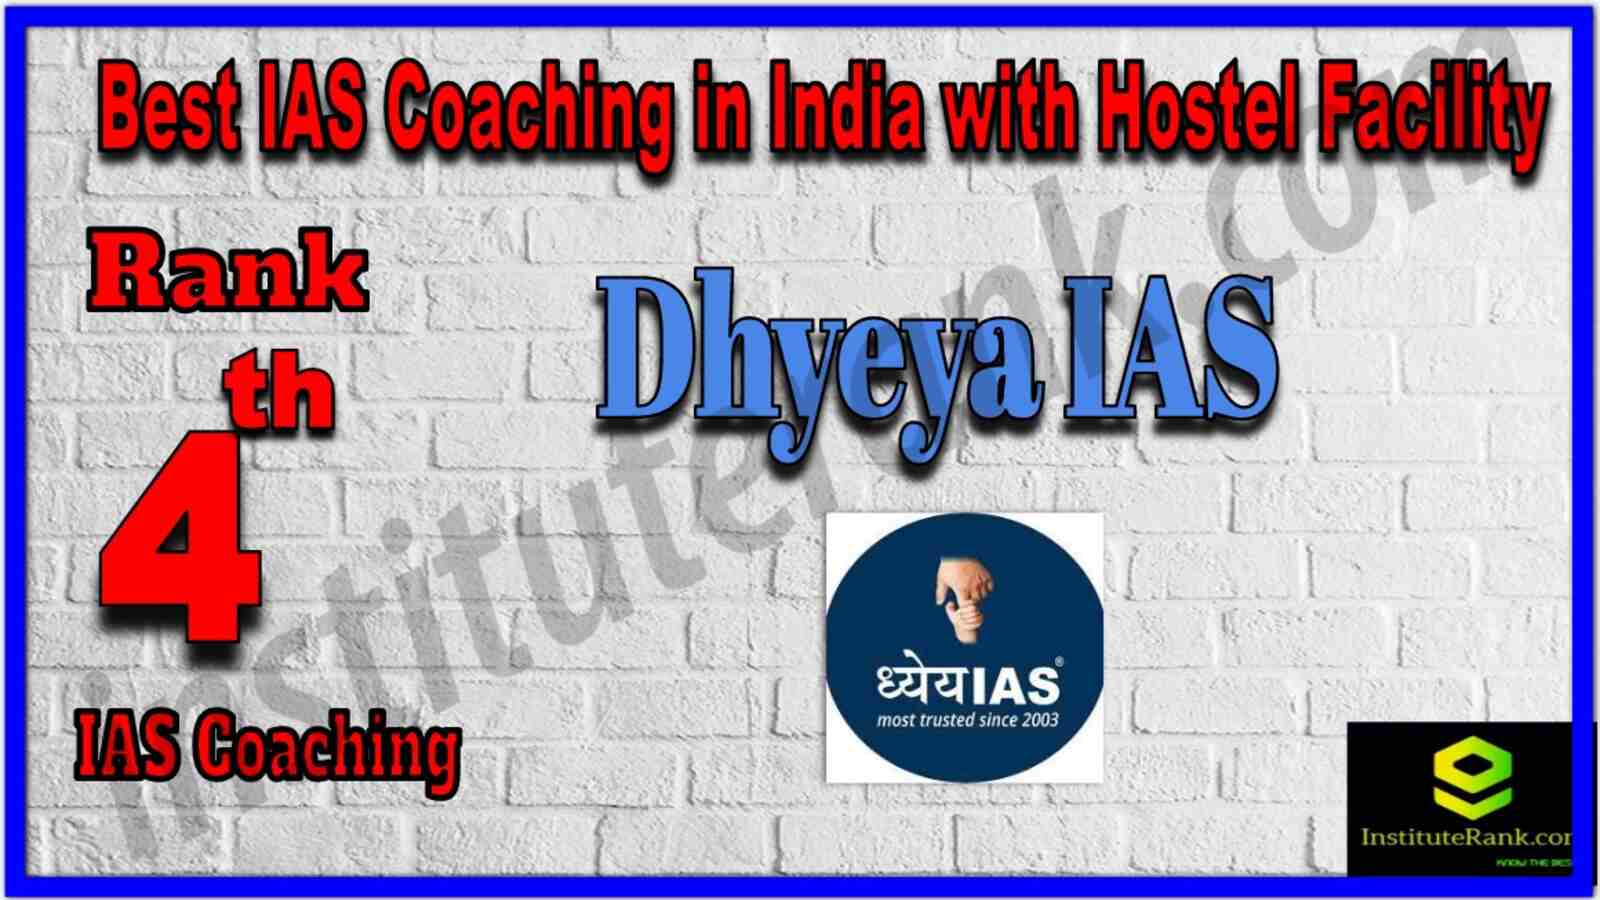 Rank 4 Best IAS Coaching in India With Hostel Facility